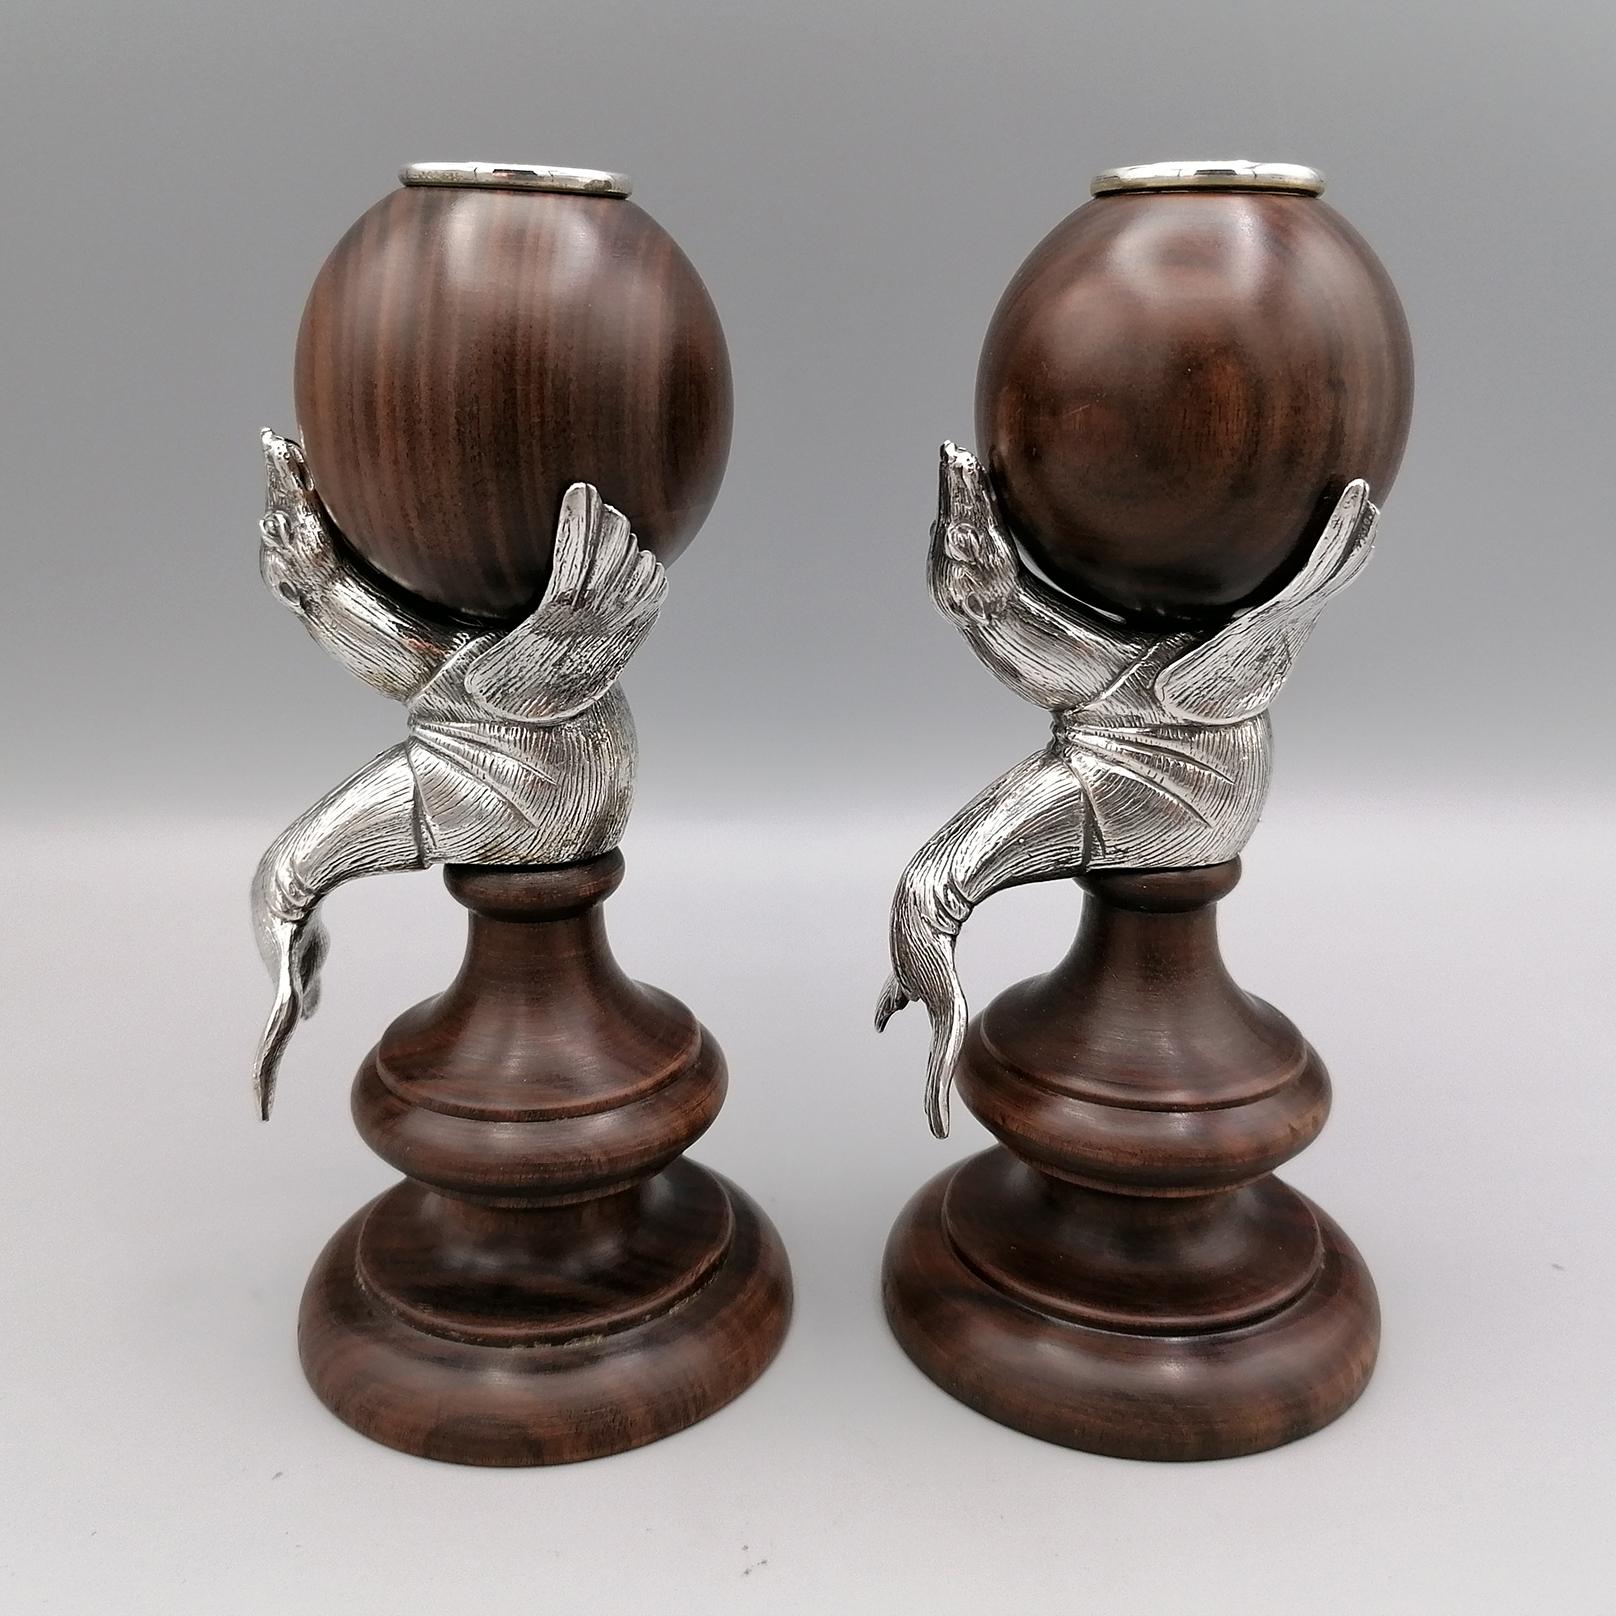 Pair of sterling silver and sierra wood candlesticks.
The candlestick depicts a silver seal that supports a wooden sphere where the holder is placed, also in 925 silver:
The base of the candlestick is also made of wood.
The seal was made with the